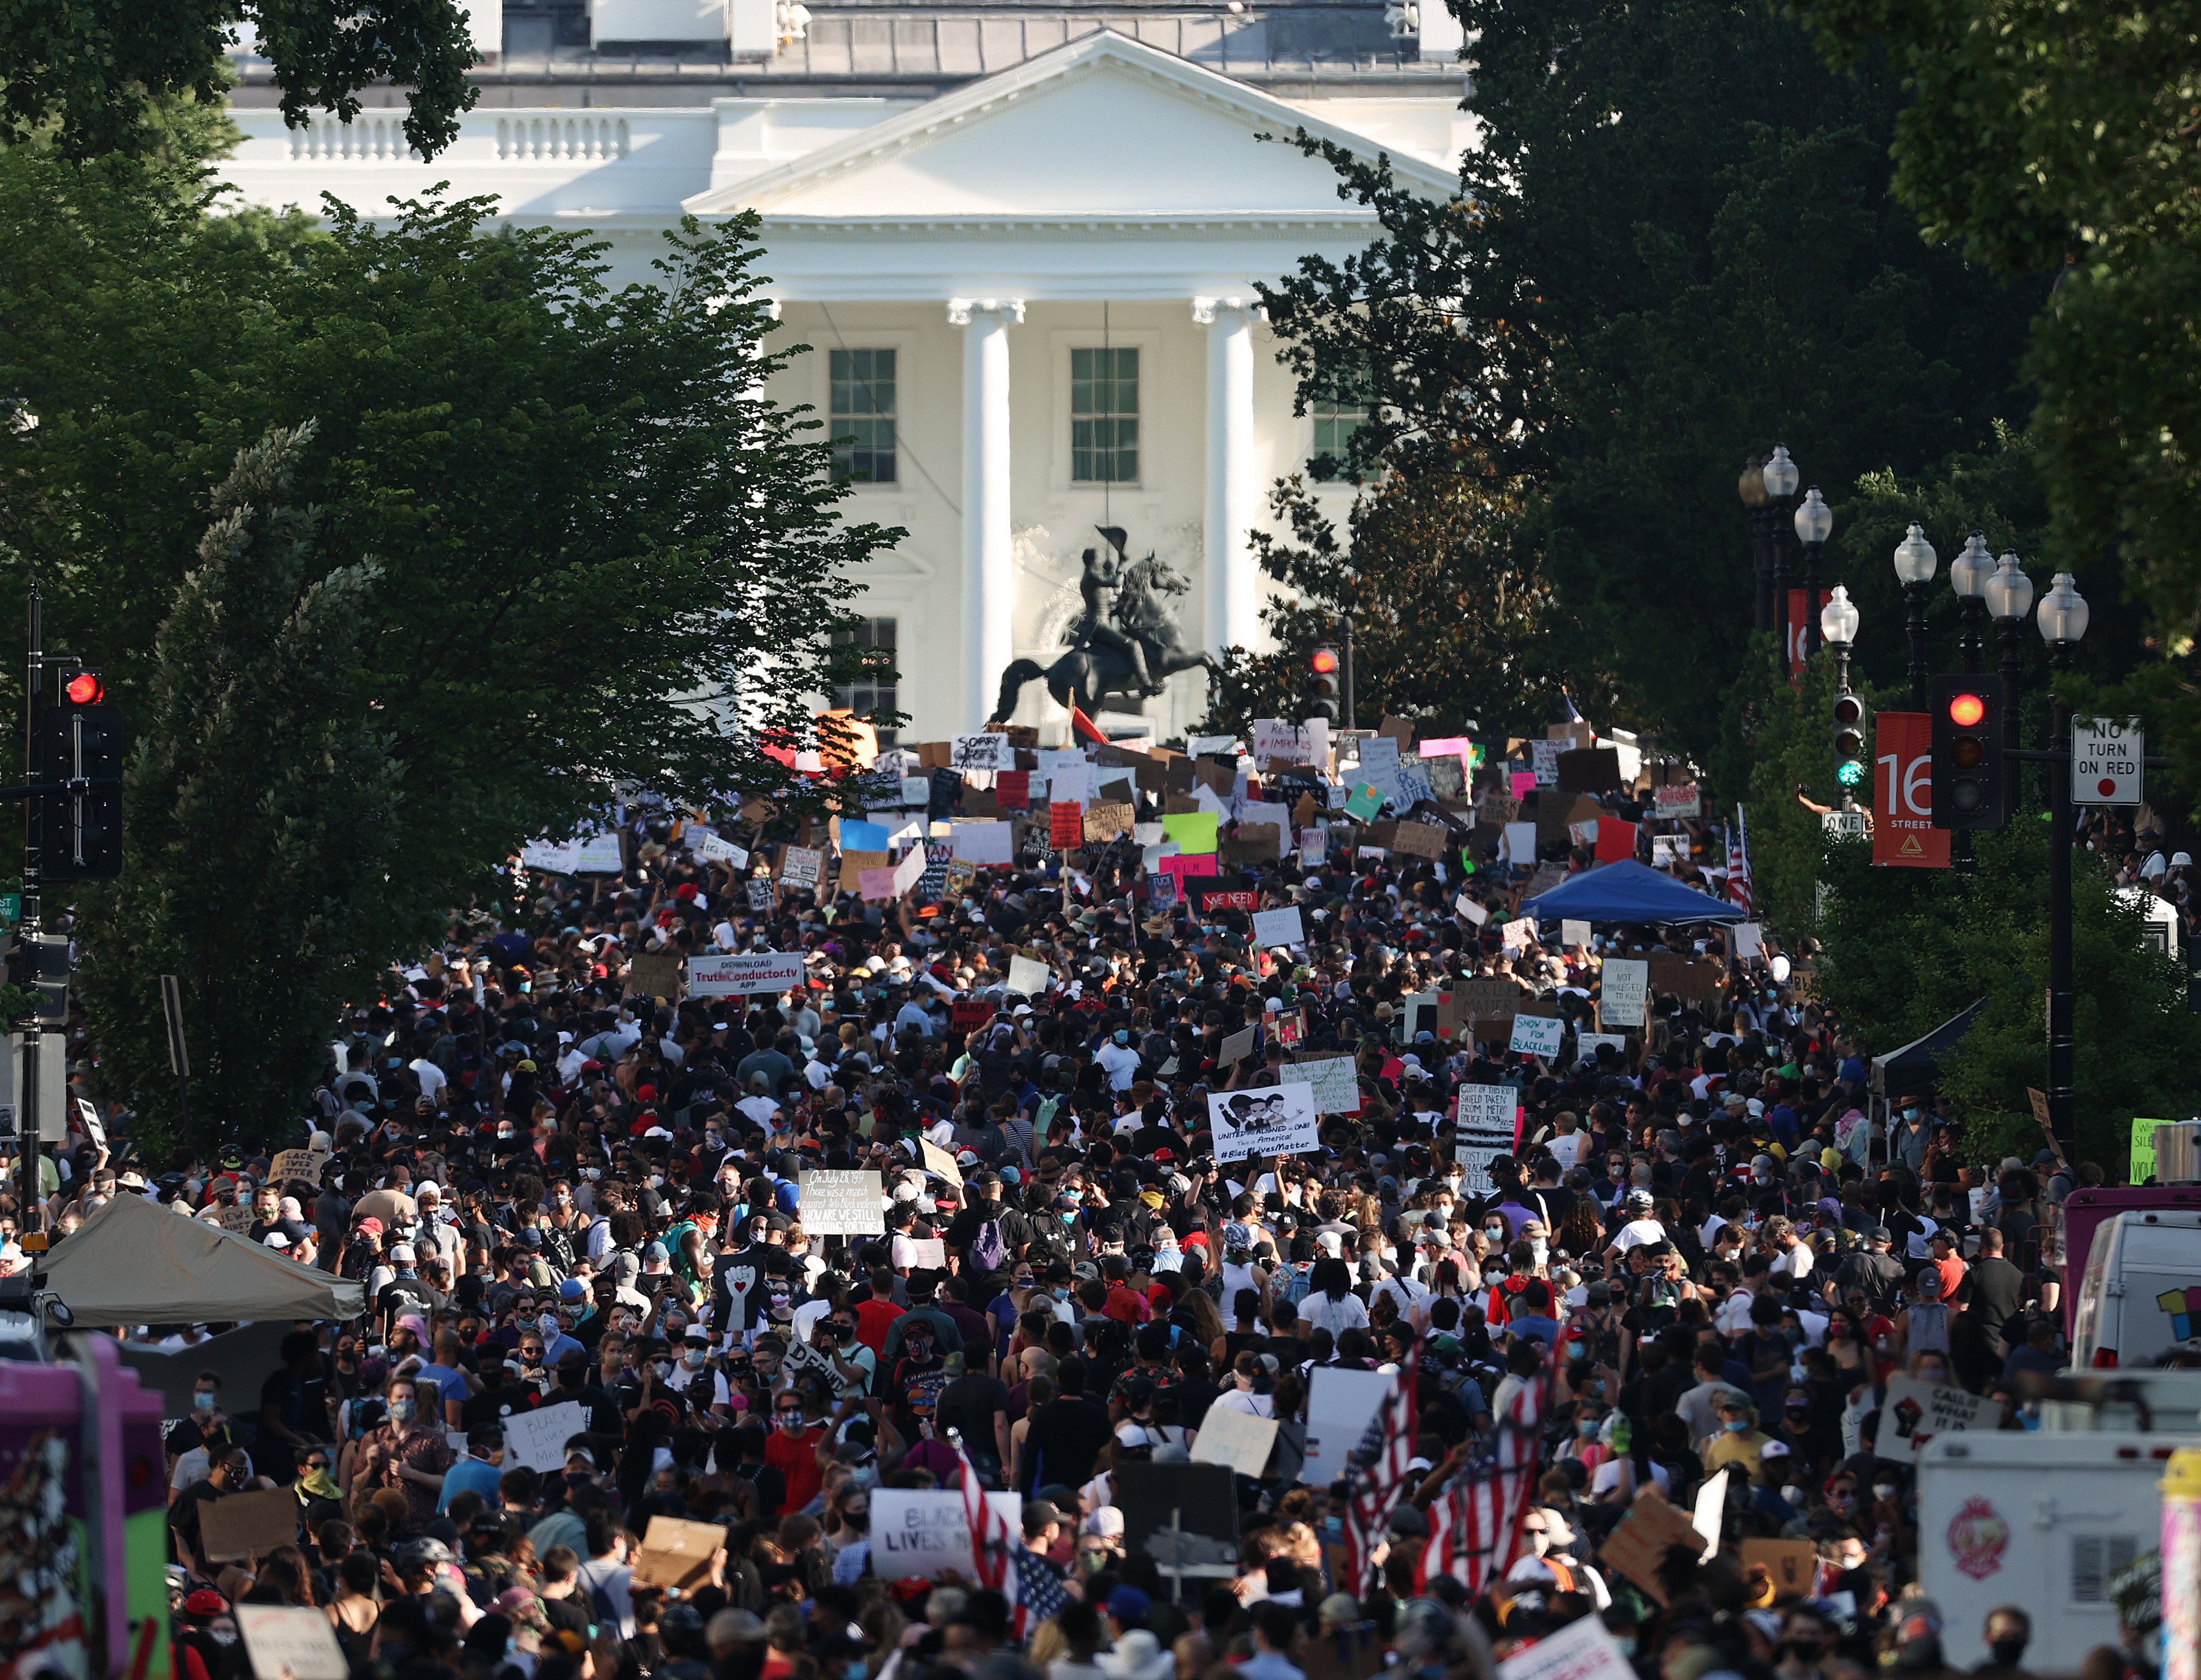 Demonstrators gather on 16th Street and the portion newly named Black Lives Plaza across from Lafayette Park while protesting peacefully against police brutality and racism on June 6, 2020 in Washington, DC. (Win McNamee/Getty Images)